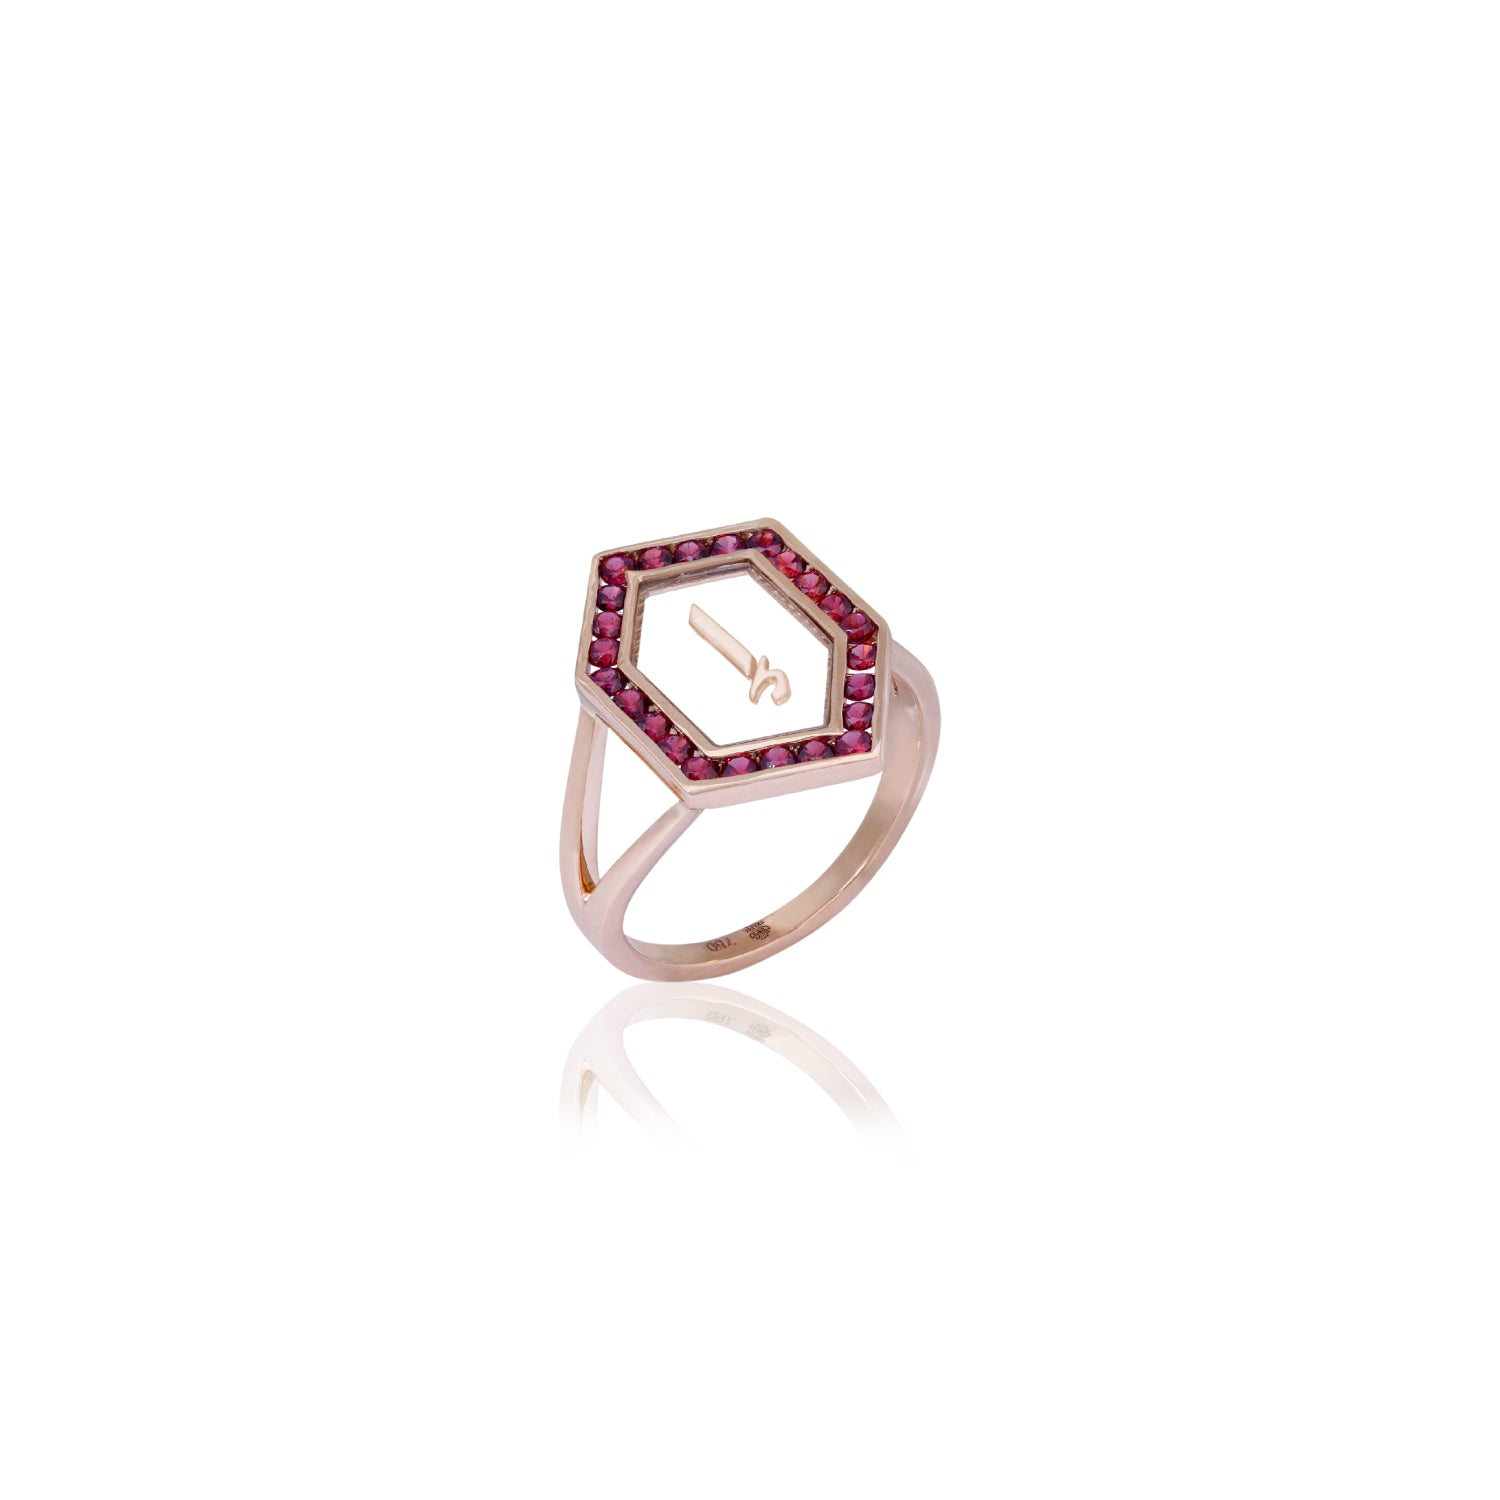 Qamoos 1.0 Letter إ Ruby Ring in Rose Gold